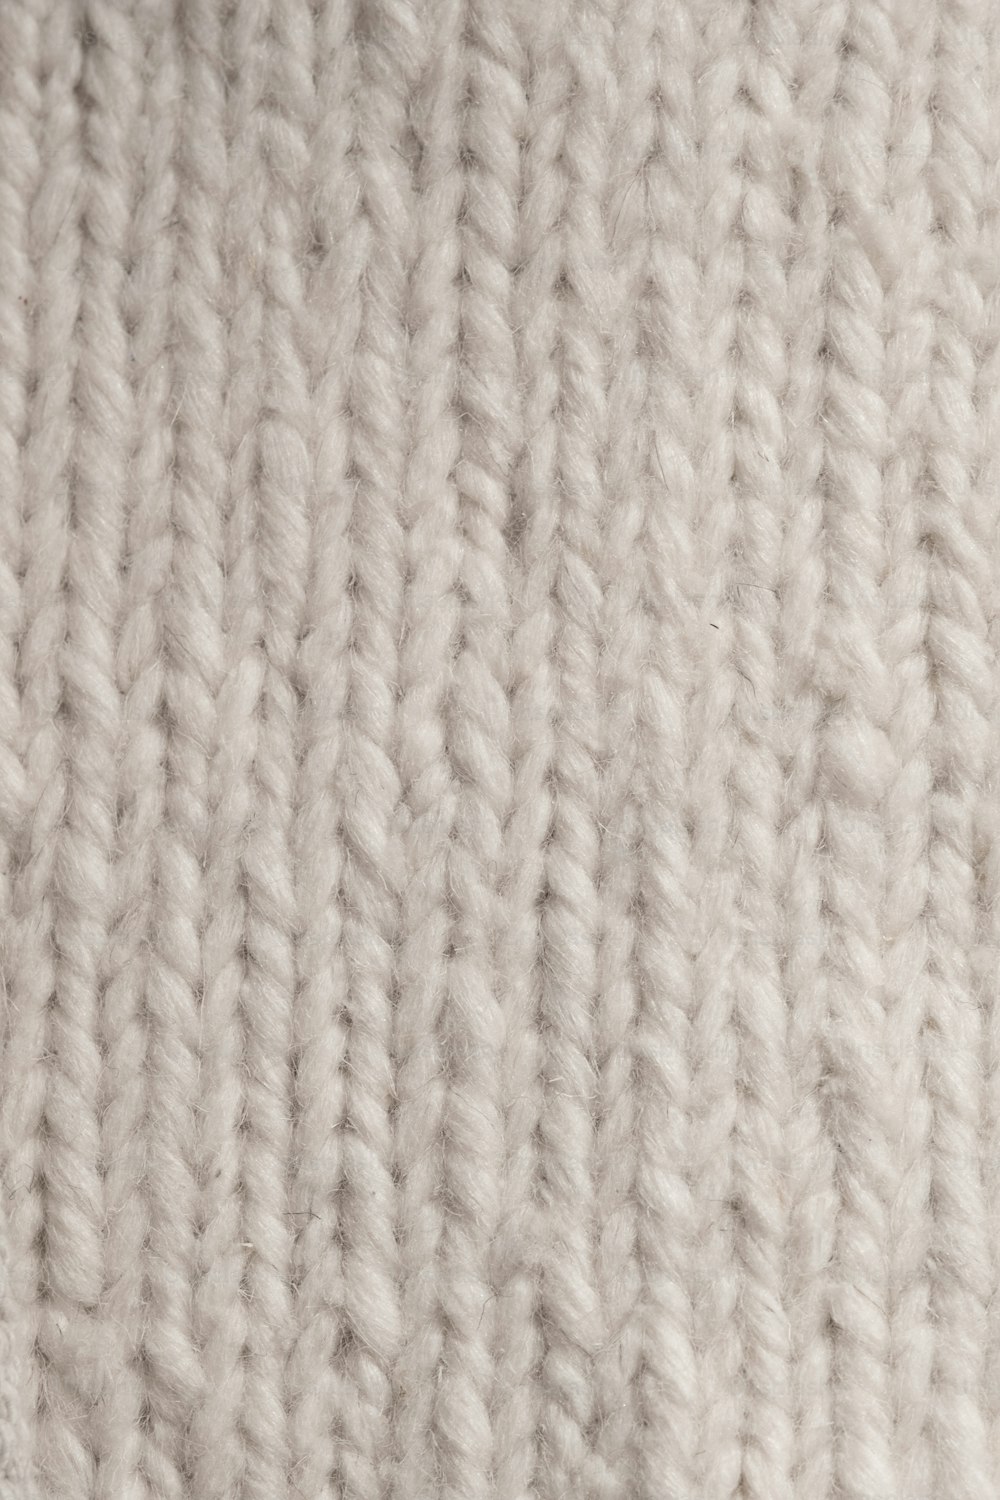 a close up of a white knitted blanket